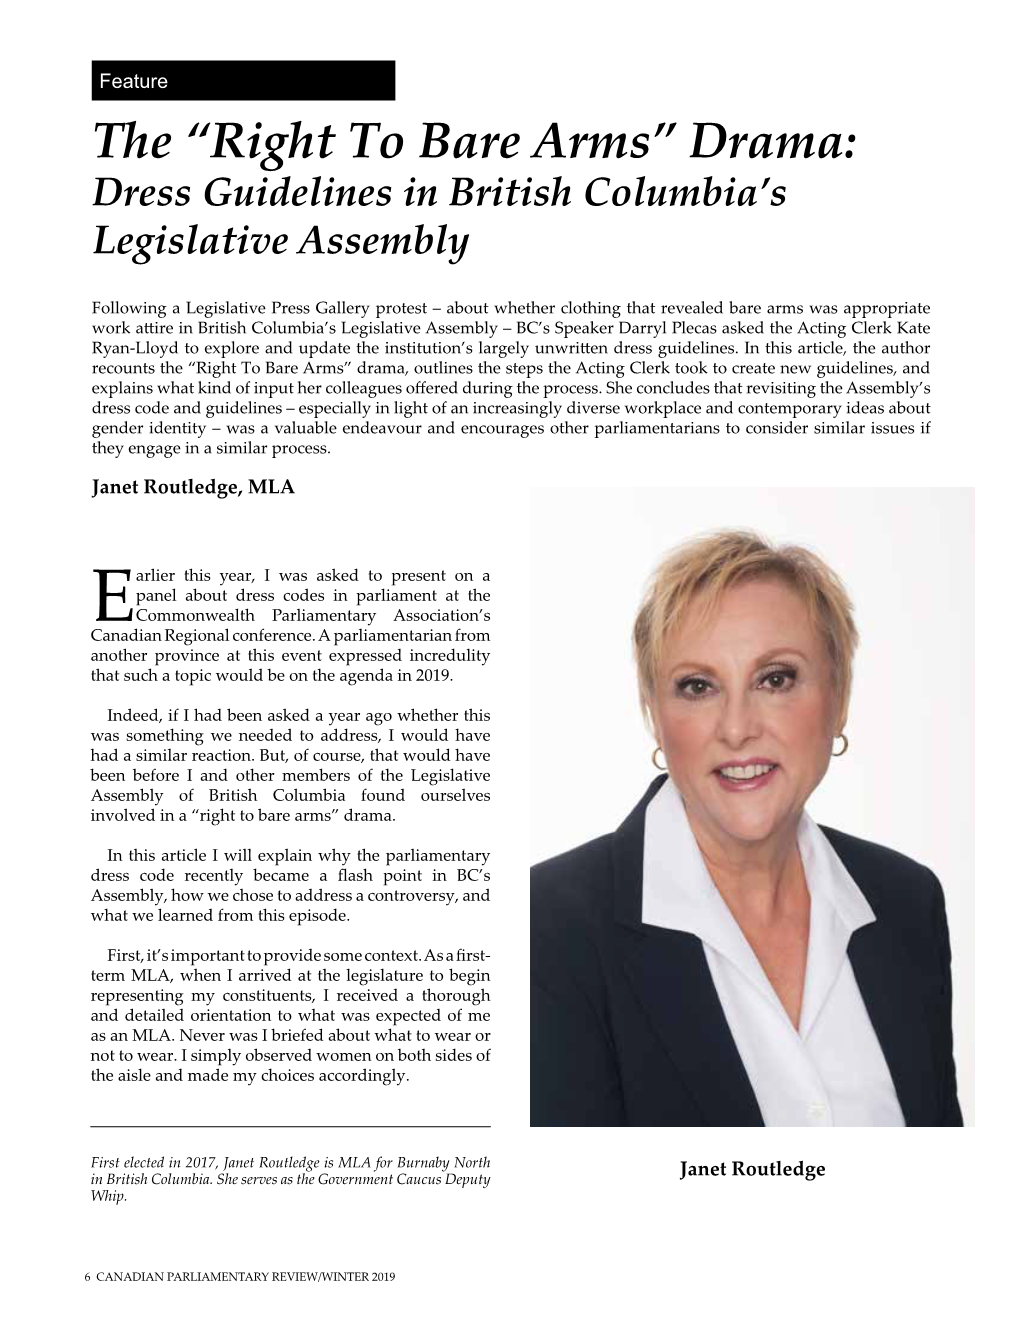 Dress Guidelines in British Columbia's Legislative Assembly